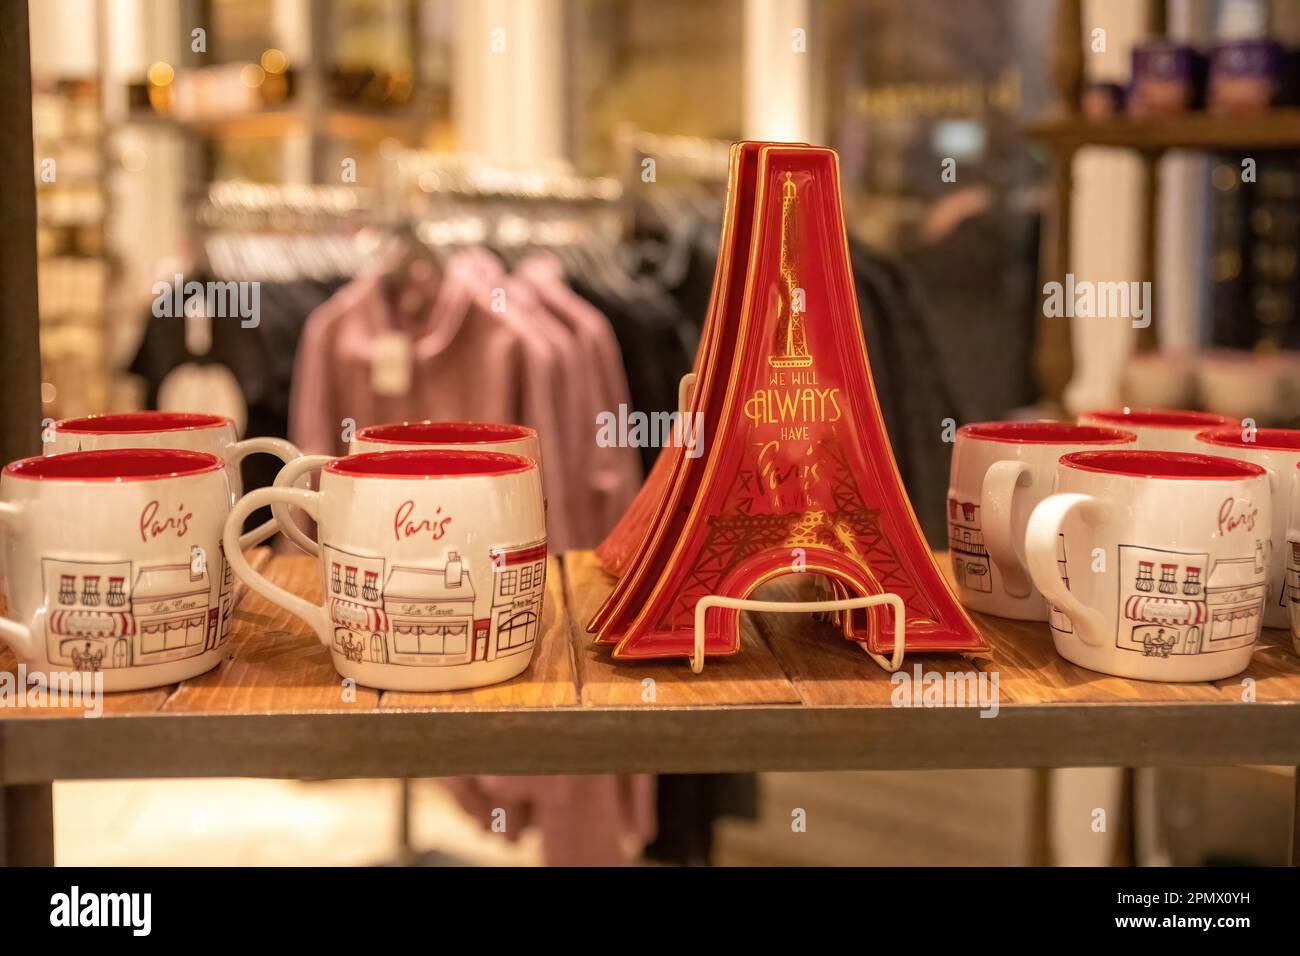 Gifts and souvenirs; cups with Paris street scene and Eiffel Tower trays, on sale at a gift shop at the Paris Hotel in Las Vegas, Nevada USA. Stock Photo